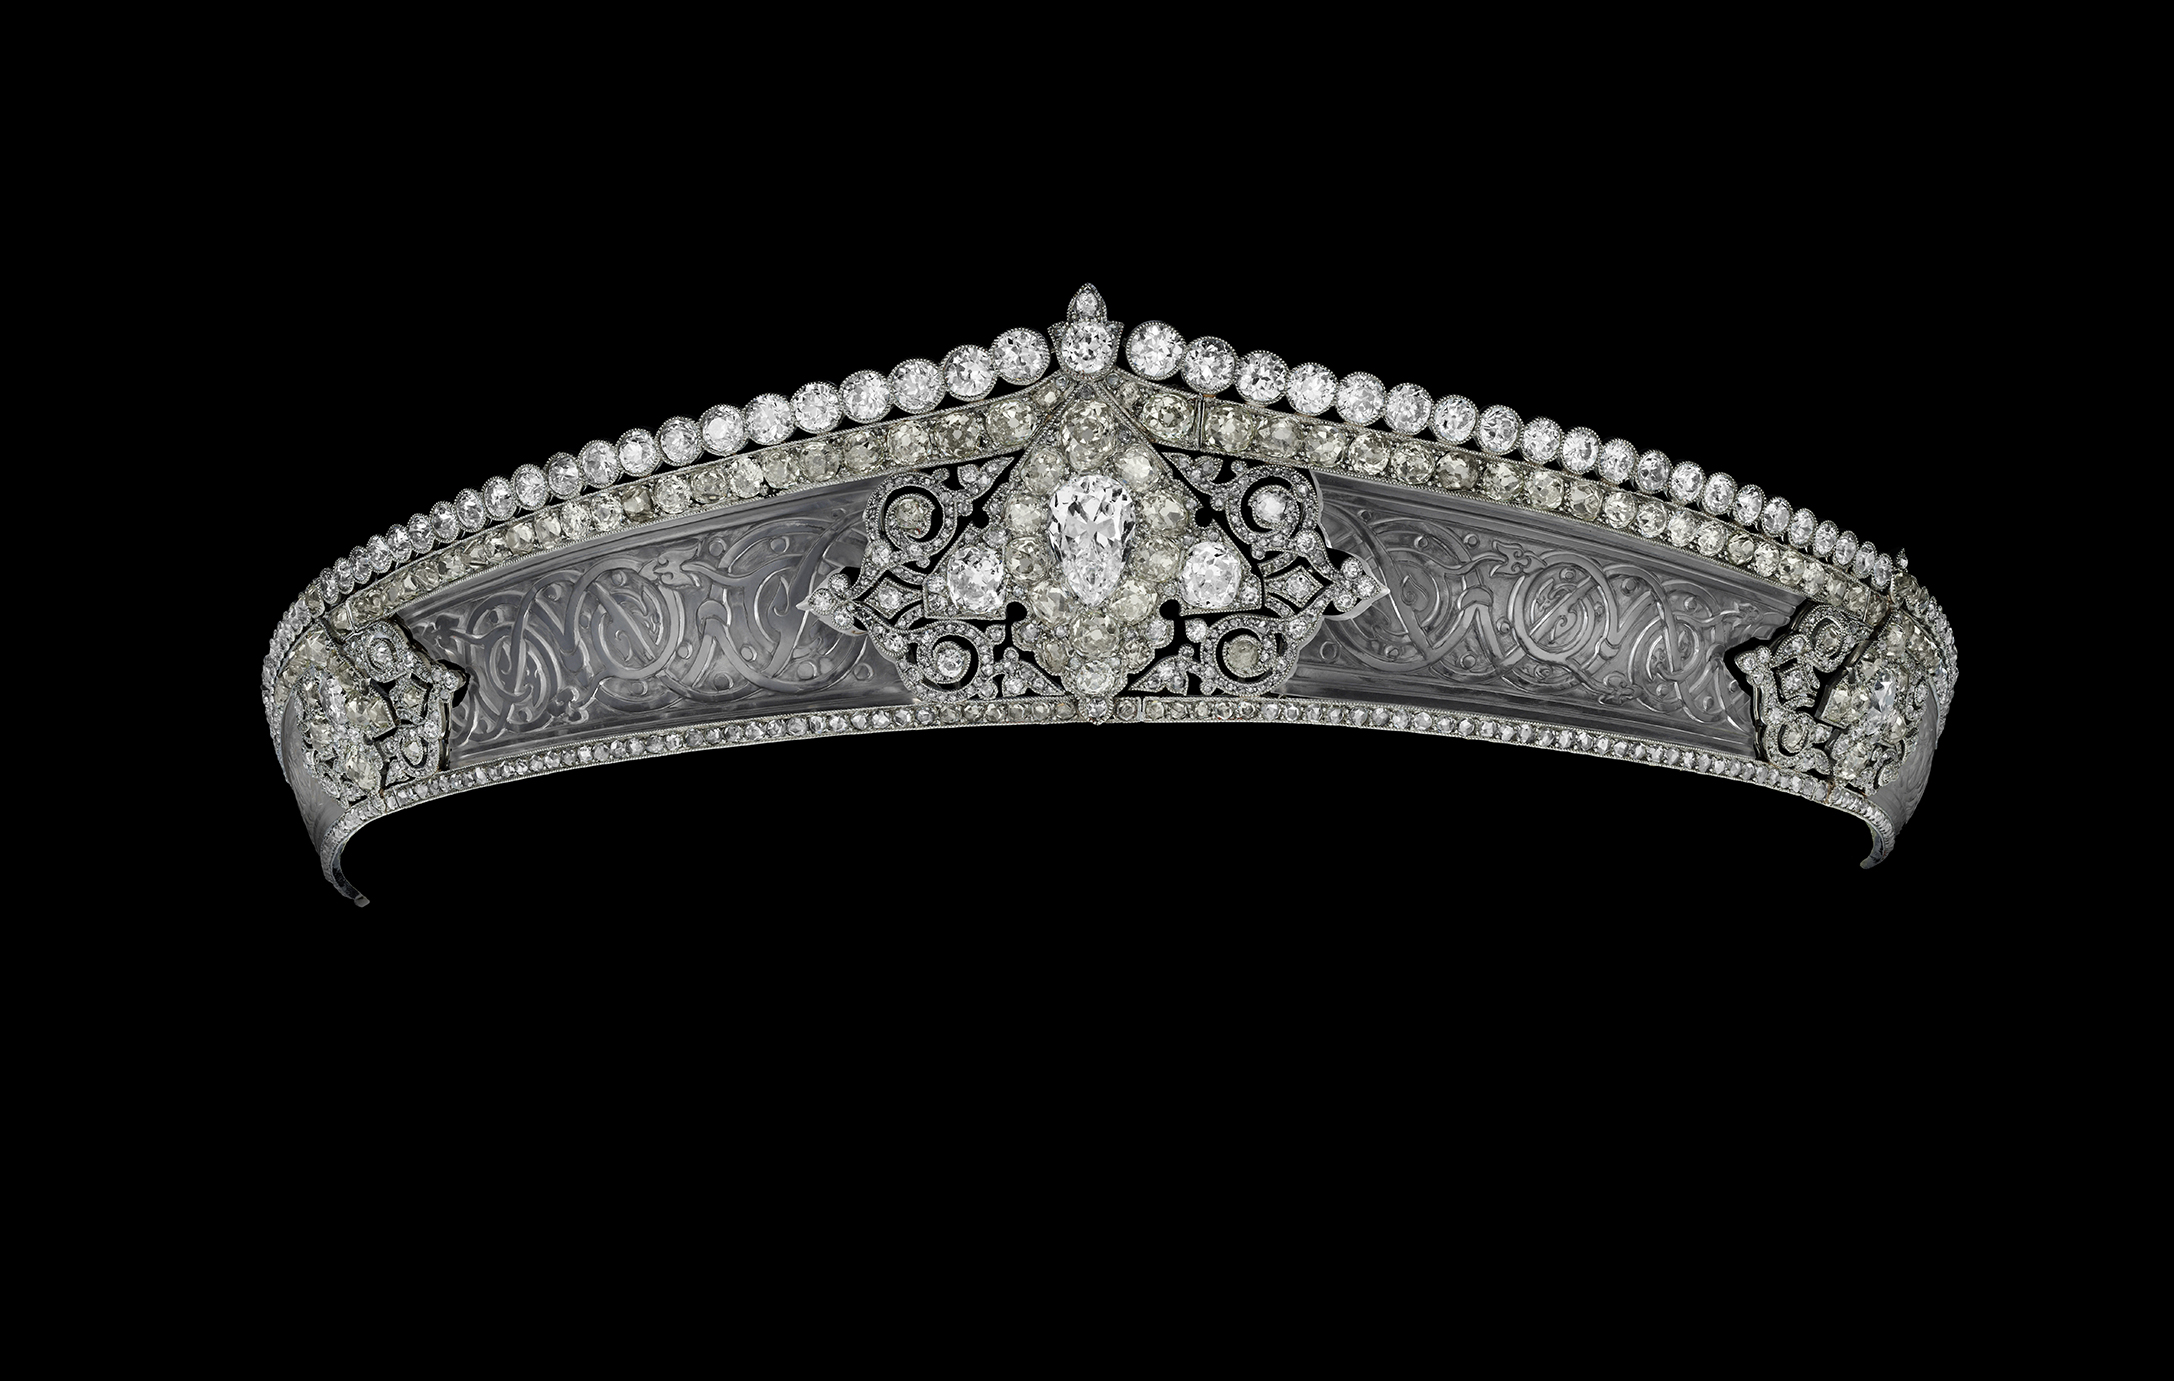 Tiara, Cartier Paris, special order, 1912. Platinum, round old- and rose-cut diamonds, pear-shaped diamonds, carved rock crystal, millegrain setting. Cartier Collection. Marian Gerard, Cartier Collection © Cartier 